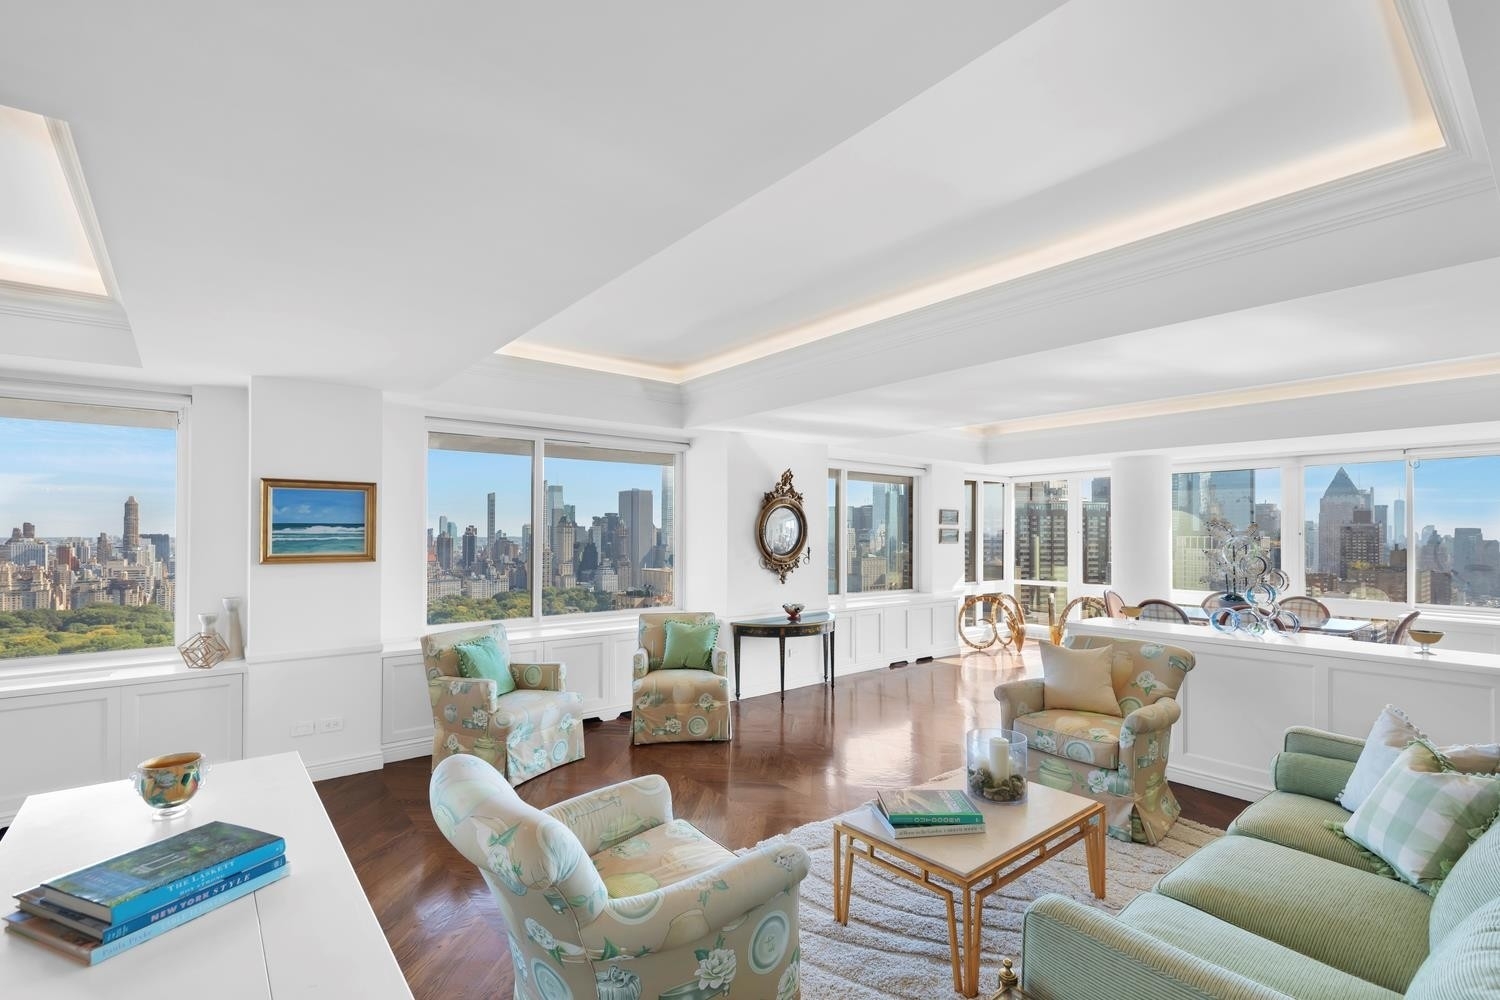 Condominium for Sale at The Millennium Tower, 111 W 67TH ST, 43AB Lincoln Square, New York, New York 10023